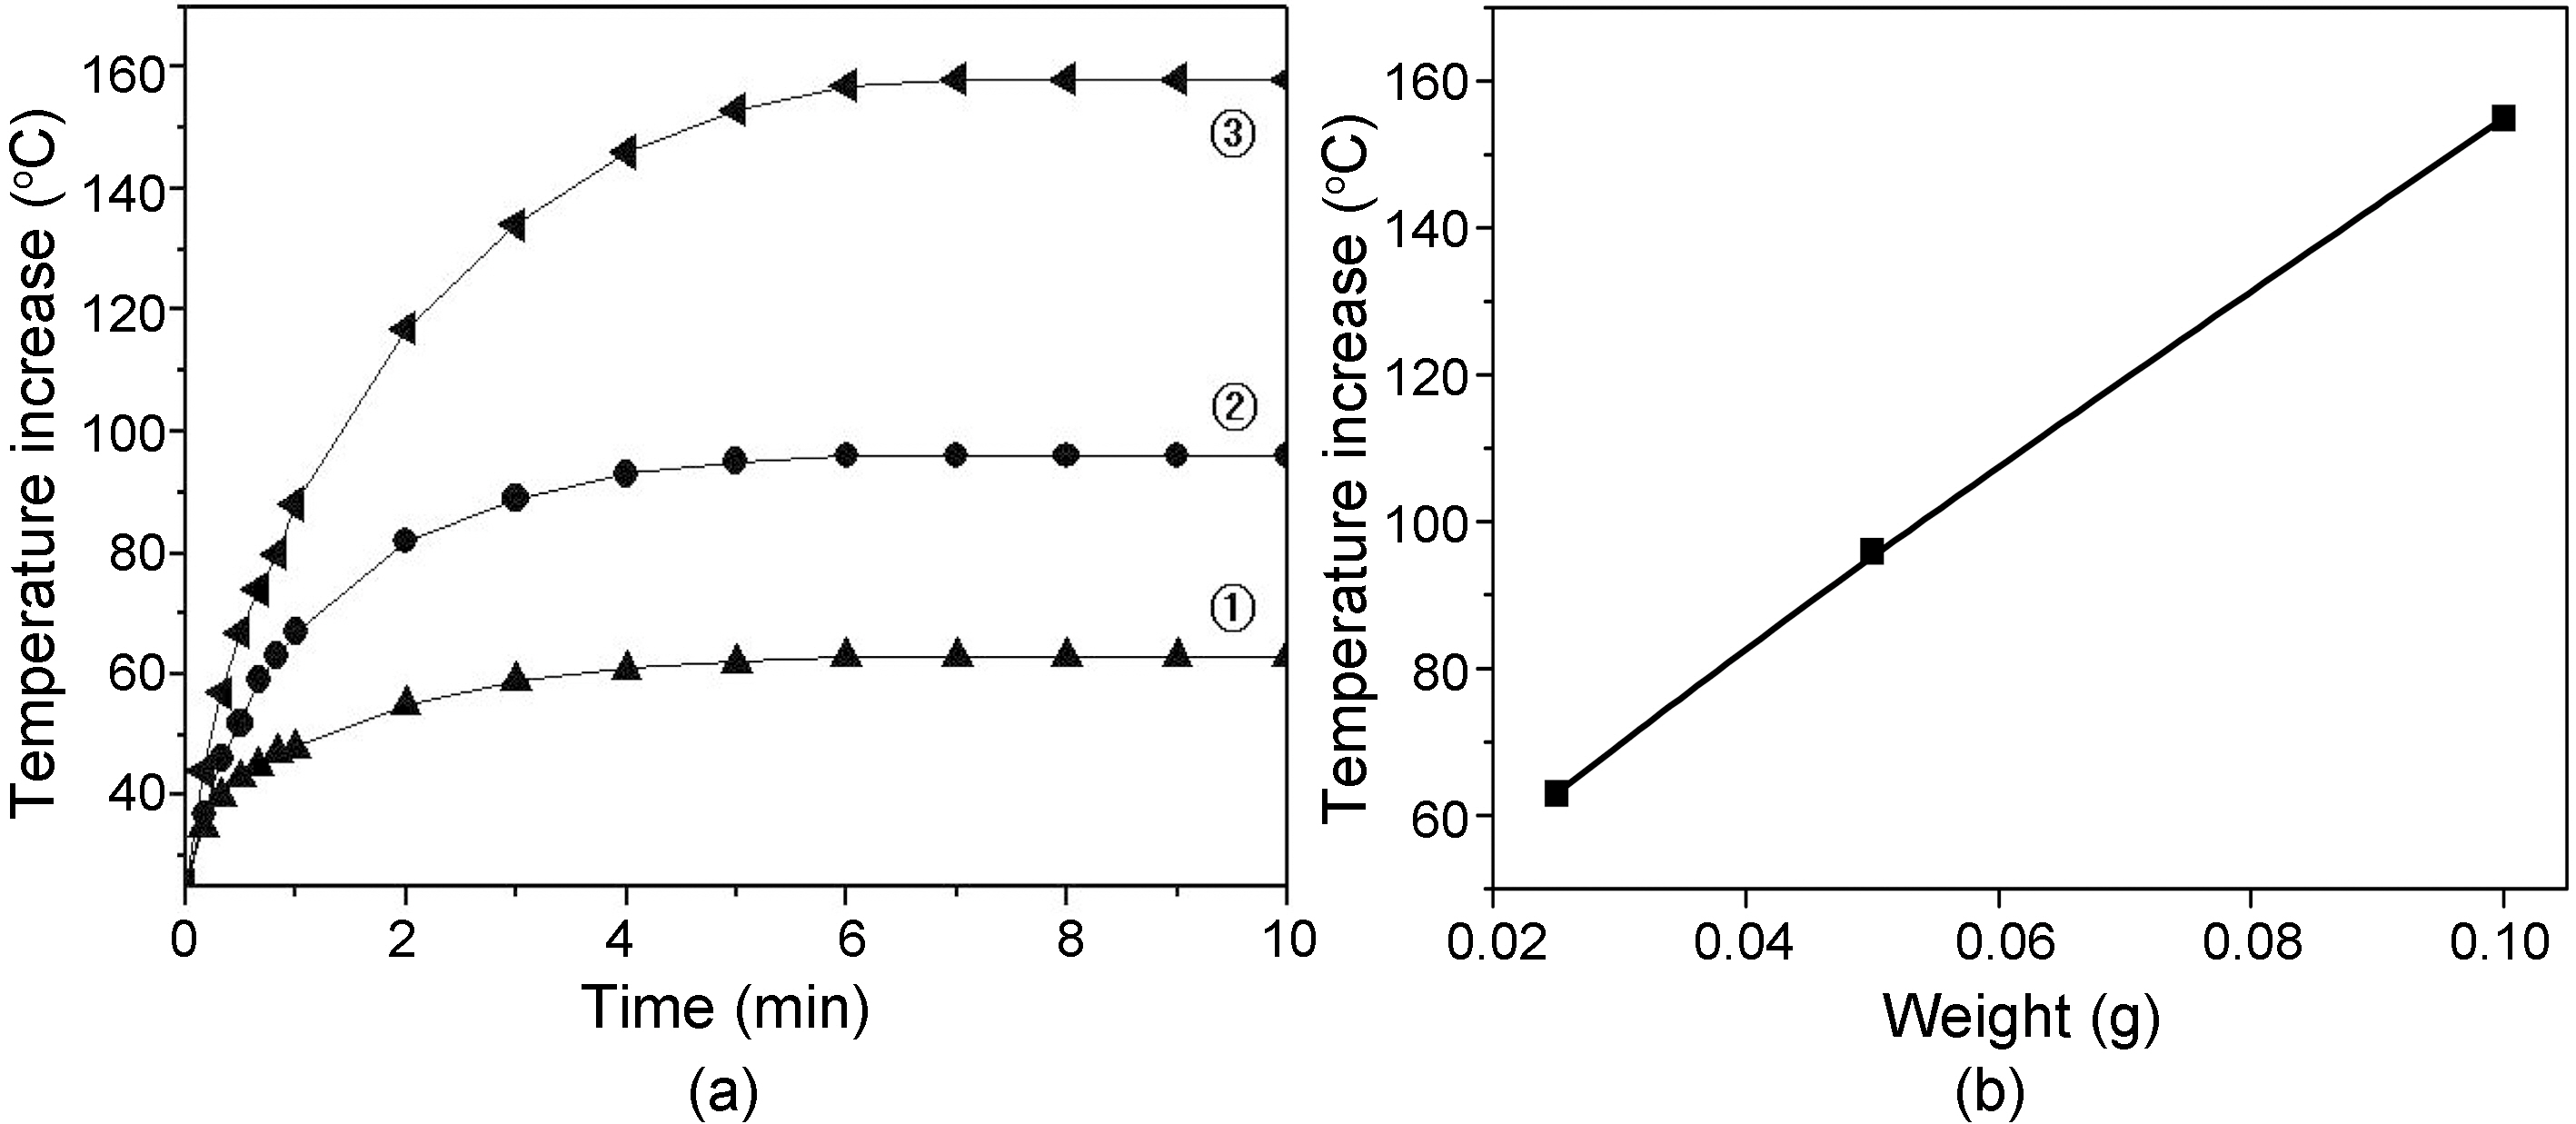 (a) Temperature increase of carbon fiber tows prepared during 1 hr at 1000℃ as a function of fiber mass (①0.025 ②0.05 and③0.1 g) and (b) relationship between temperature and fiber mass at 10 min contact time of Fig. 8(a).